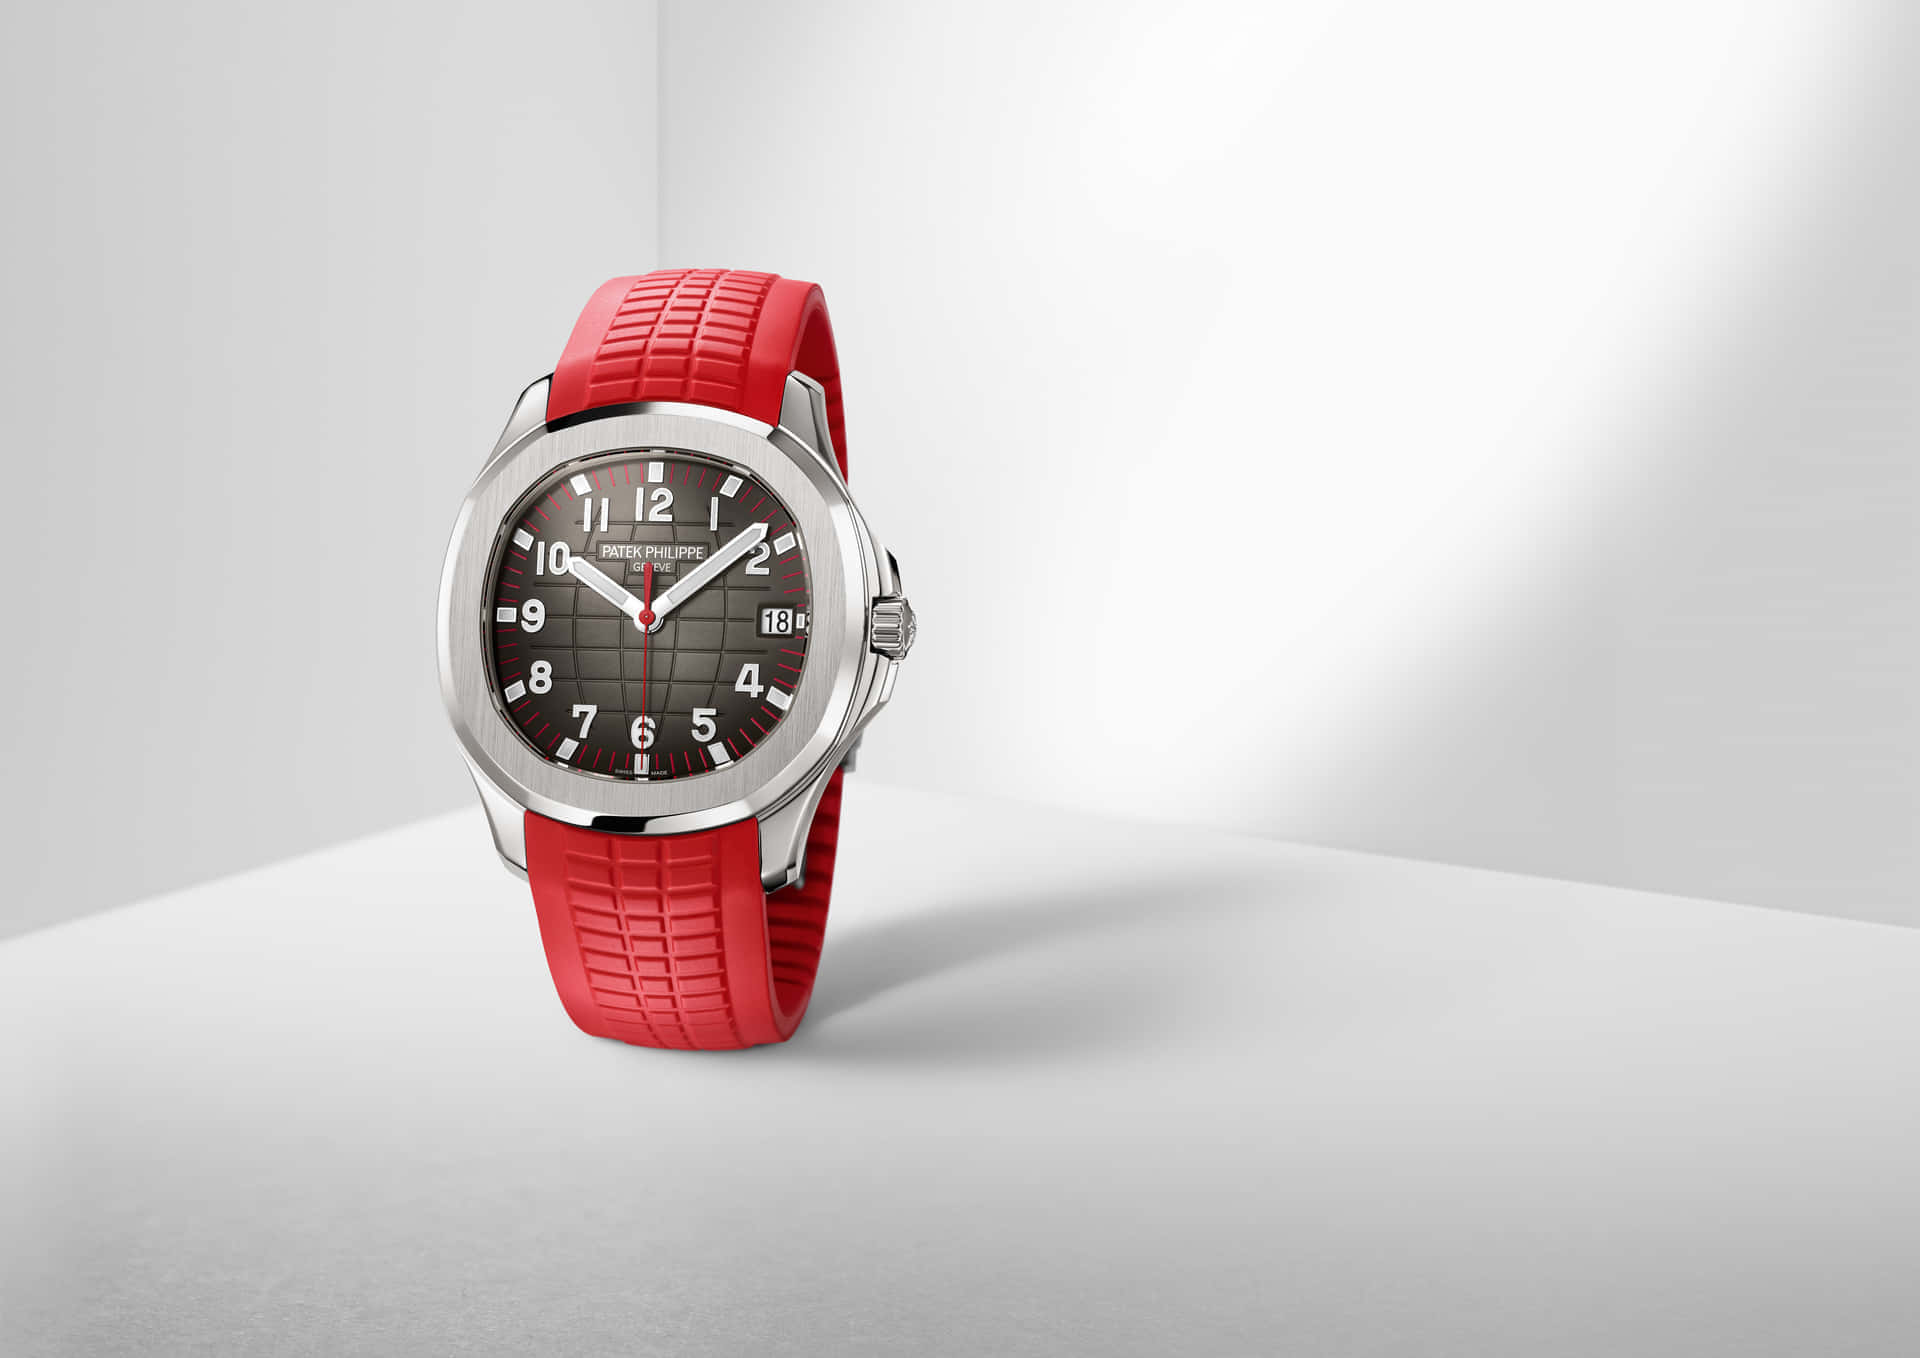 Keep track of your time with a stylish watch.